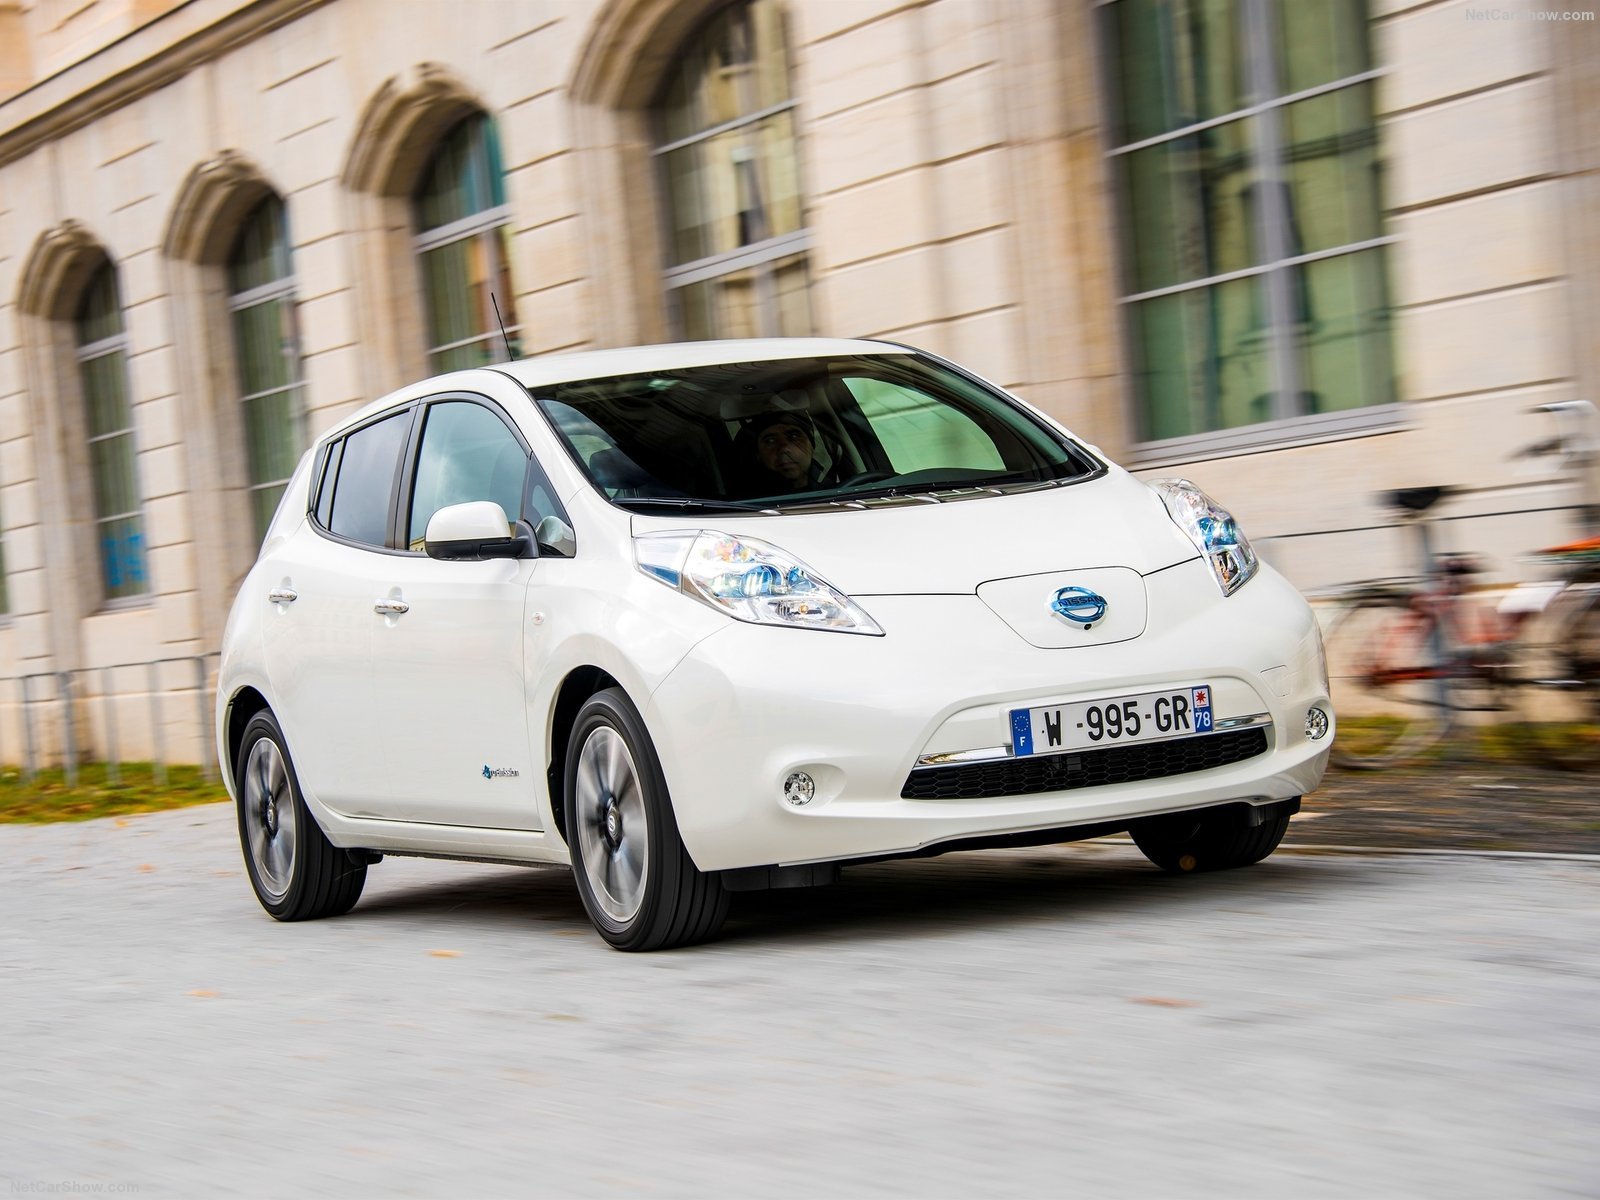 nissan, Leaf, 30 kwh, Cars, Electric, 2016 Wallpaper